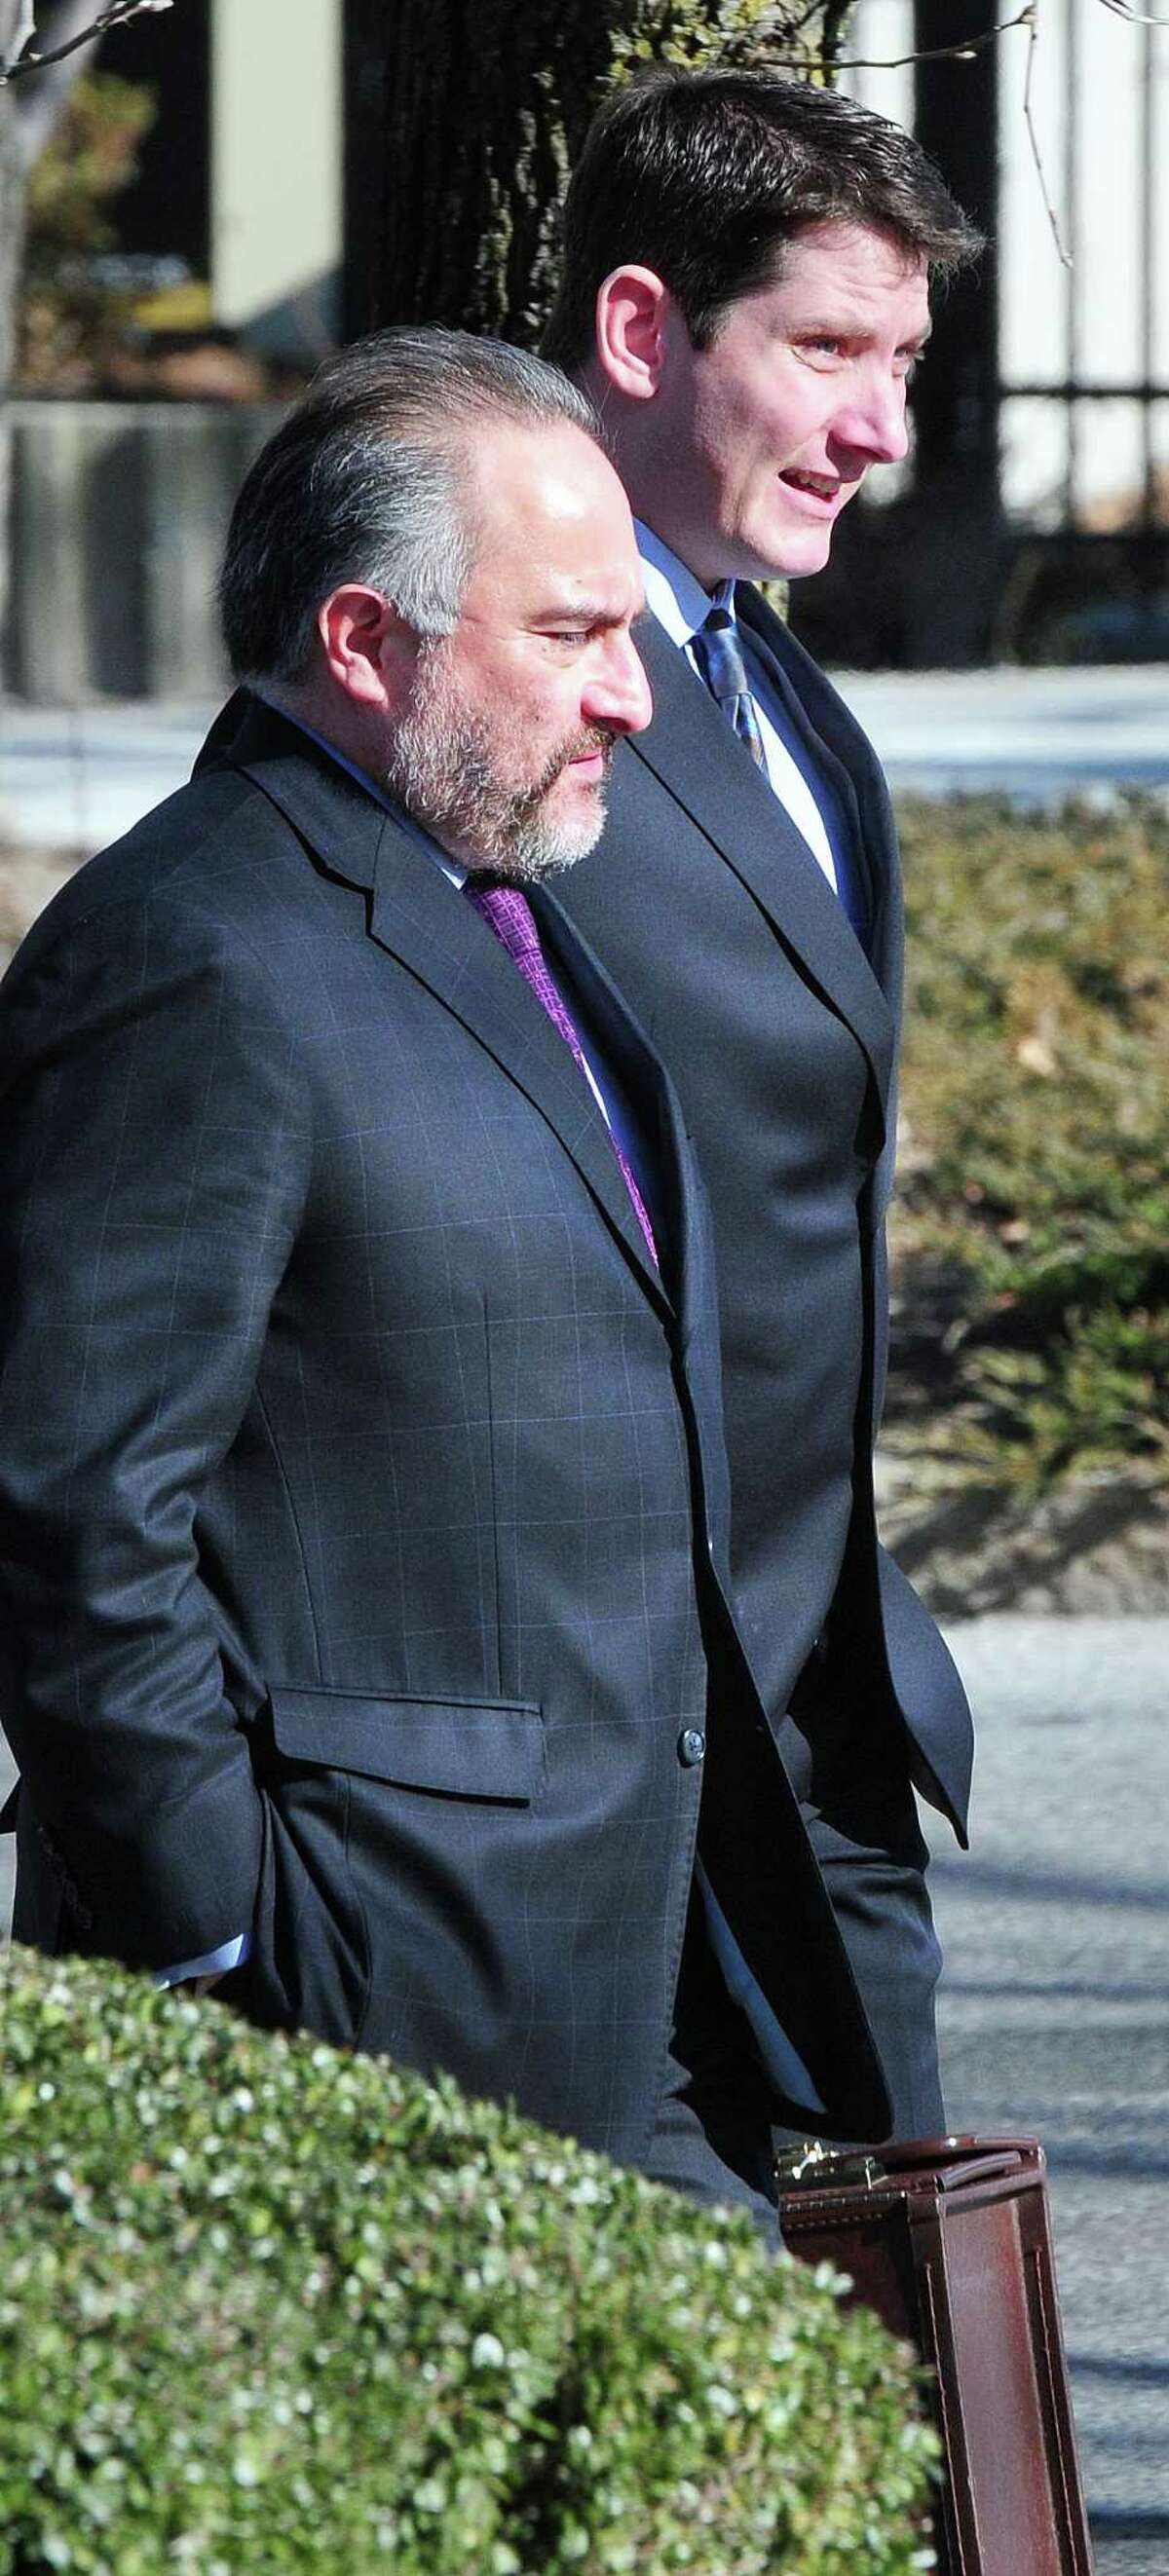 Former East Haven Police Officer David Cari (right) walks into Federal Court in Bridgeport with his attorney Alex V. Hernandez (left) on 1/24/2013. Photo by Arnold Gold/New Haven Register AG0481E